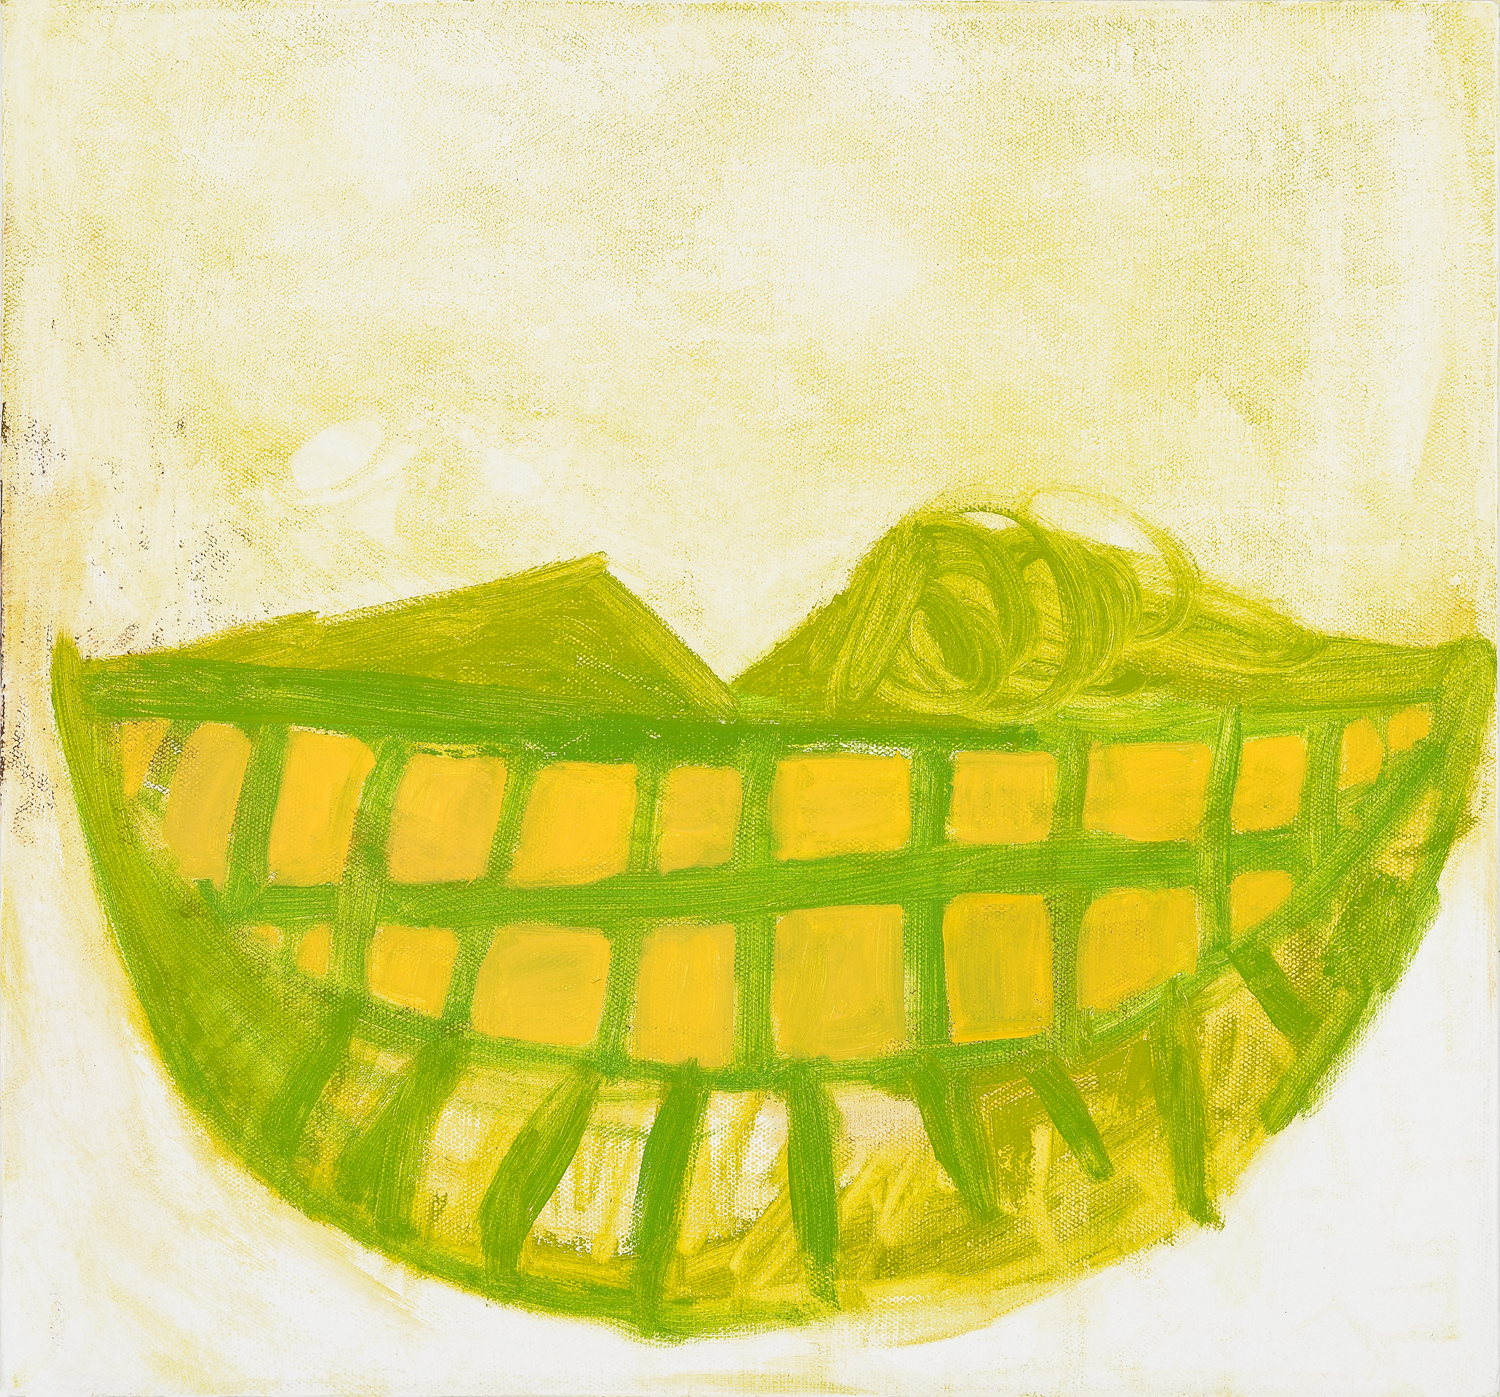  Smiley one too, 2015. 14" x 15", oil on canvas.  